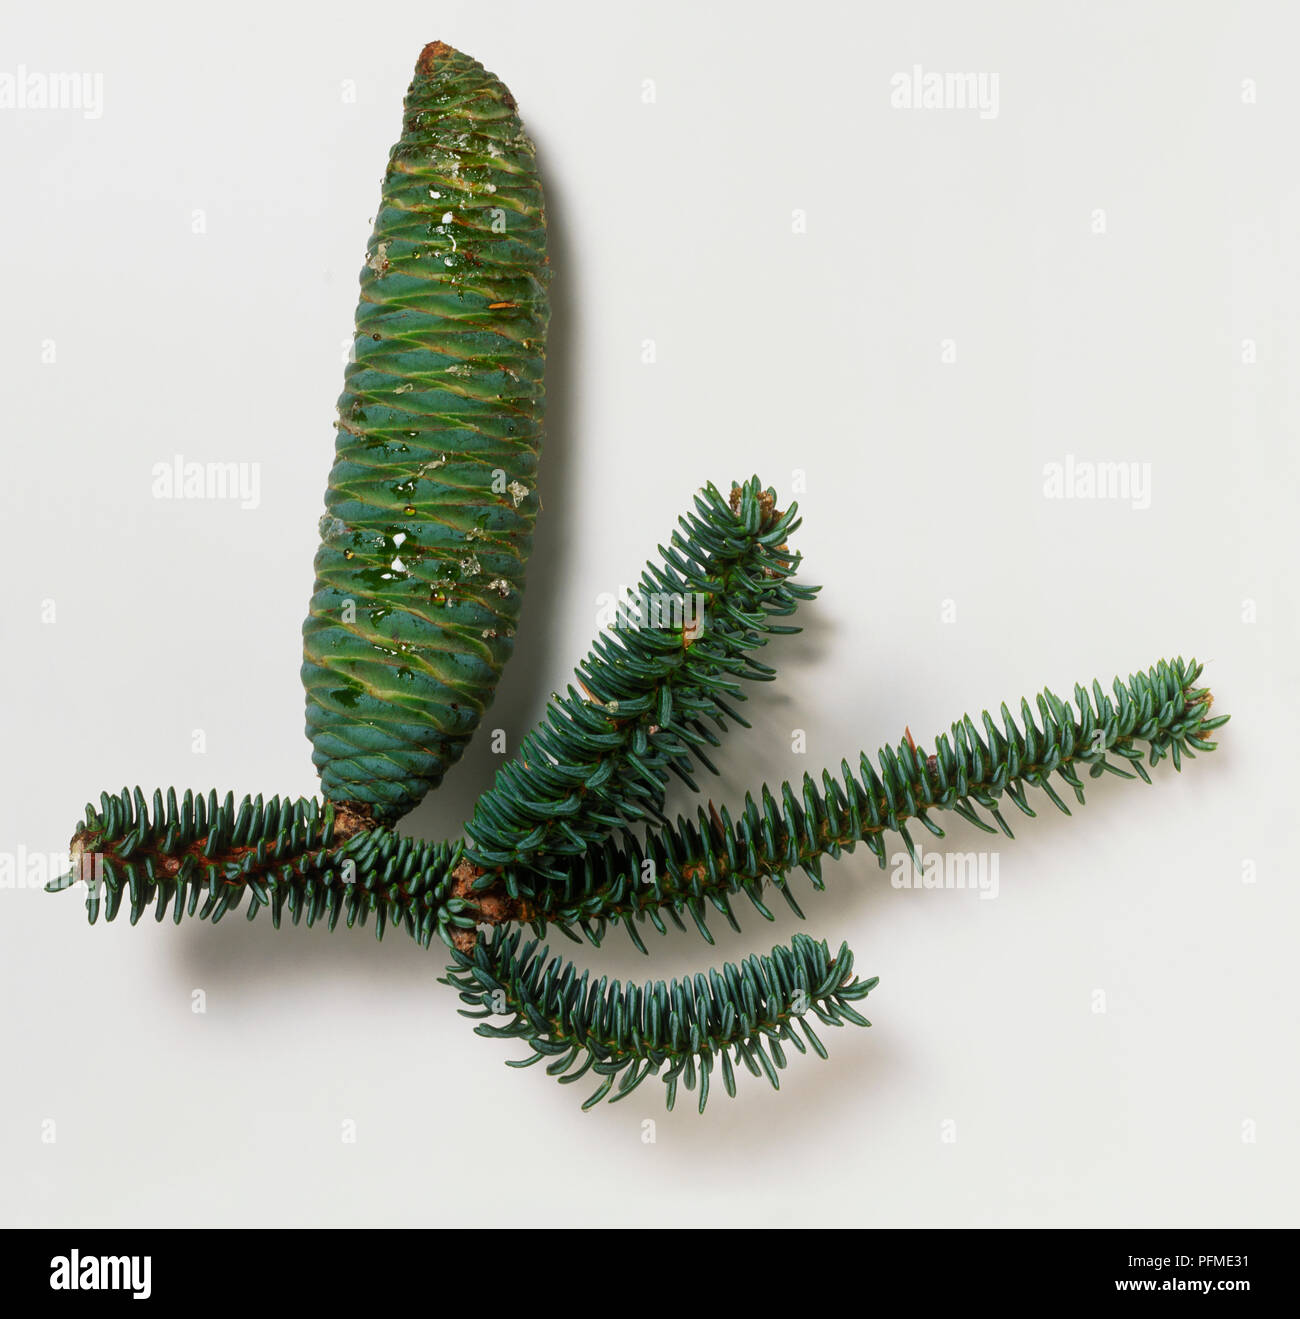 Cone and leaves from Abies pinsapo (Spanish fir), close-up Stock Photo